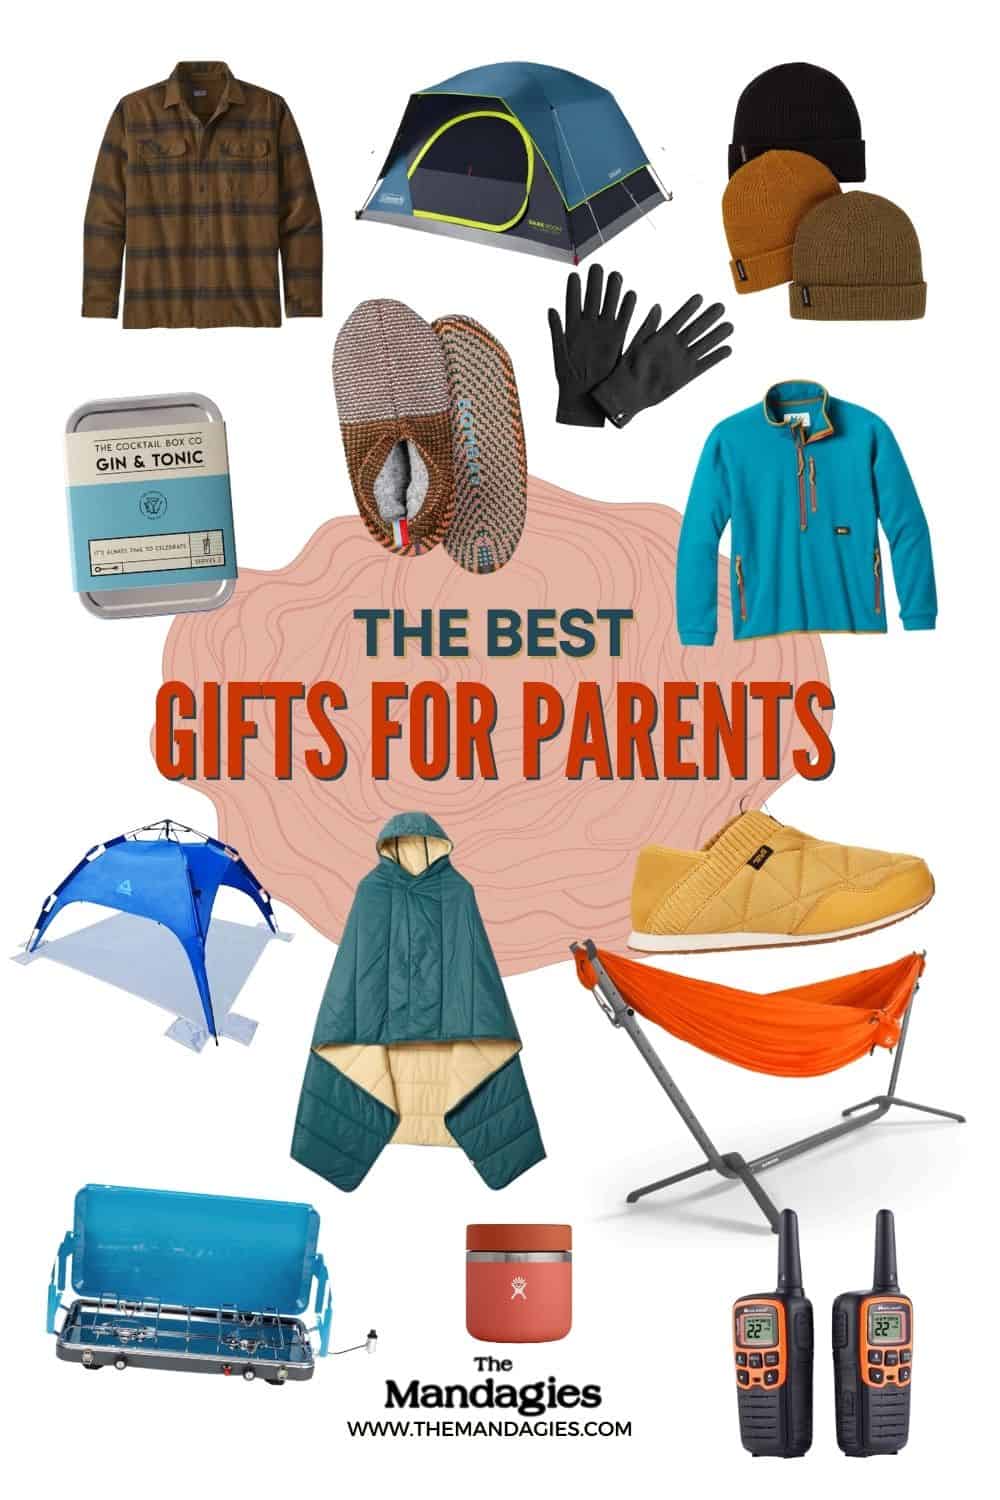 Top College Graduation Gifts From Parents | Citizens